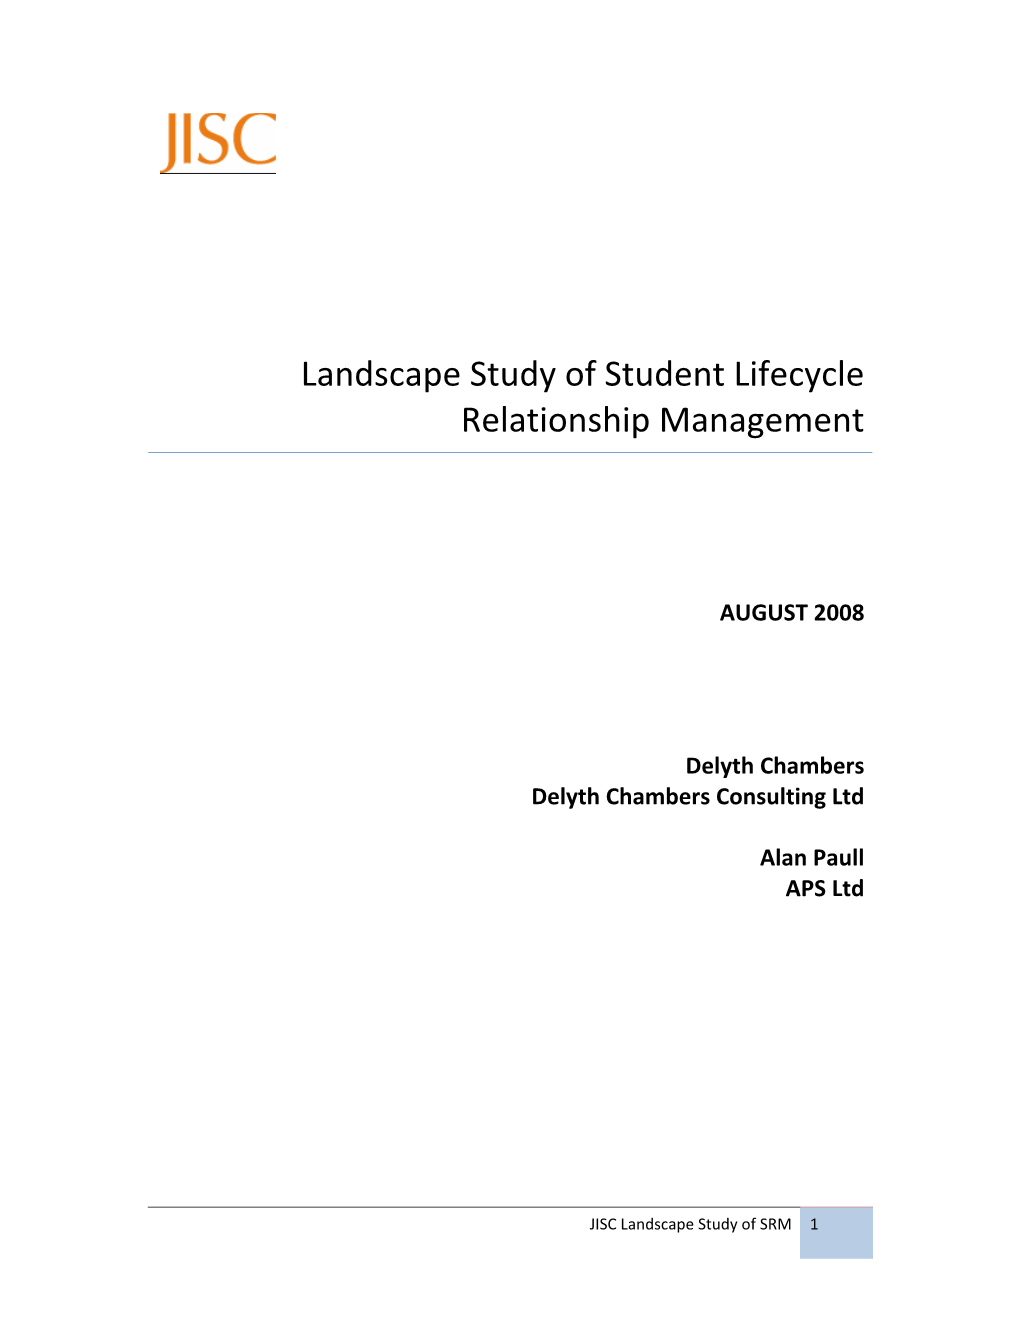 Student Lifecycle Report